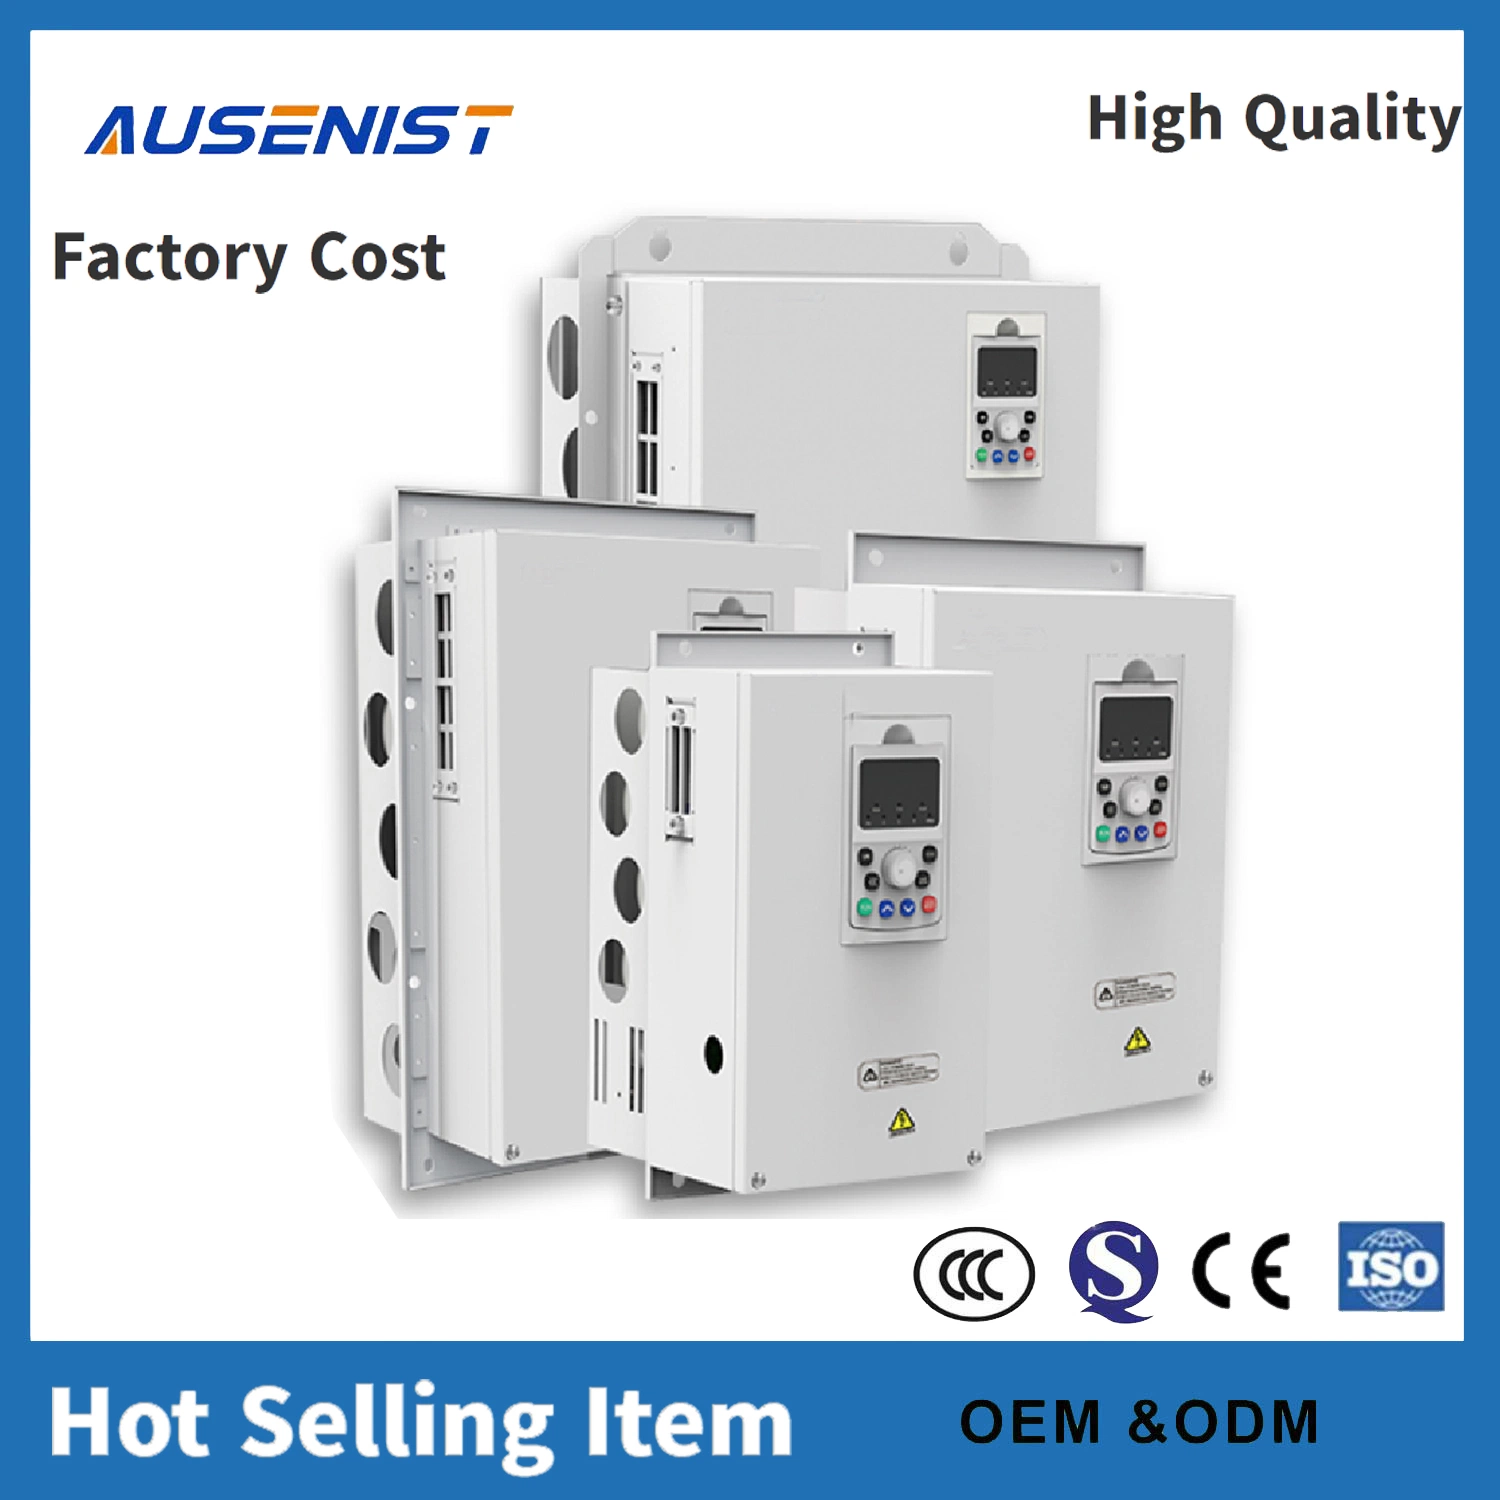 Ausenist High Performance VFD 380V Three-Phase AC Frequency Converter 0.75kw Motor Speed Control Vector Variable Jt550 Series Frequency Inverter